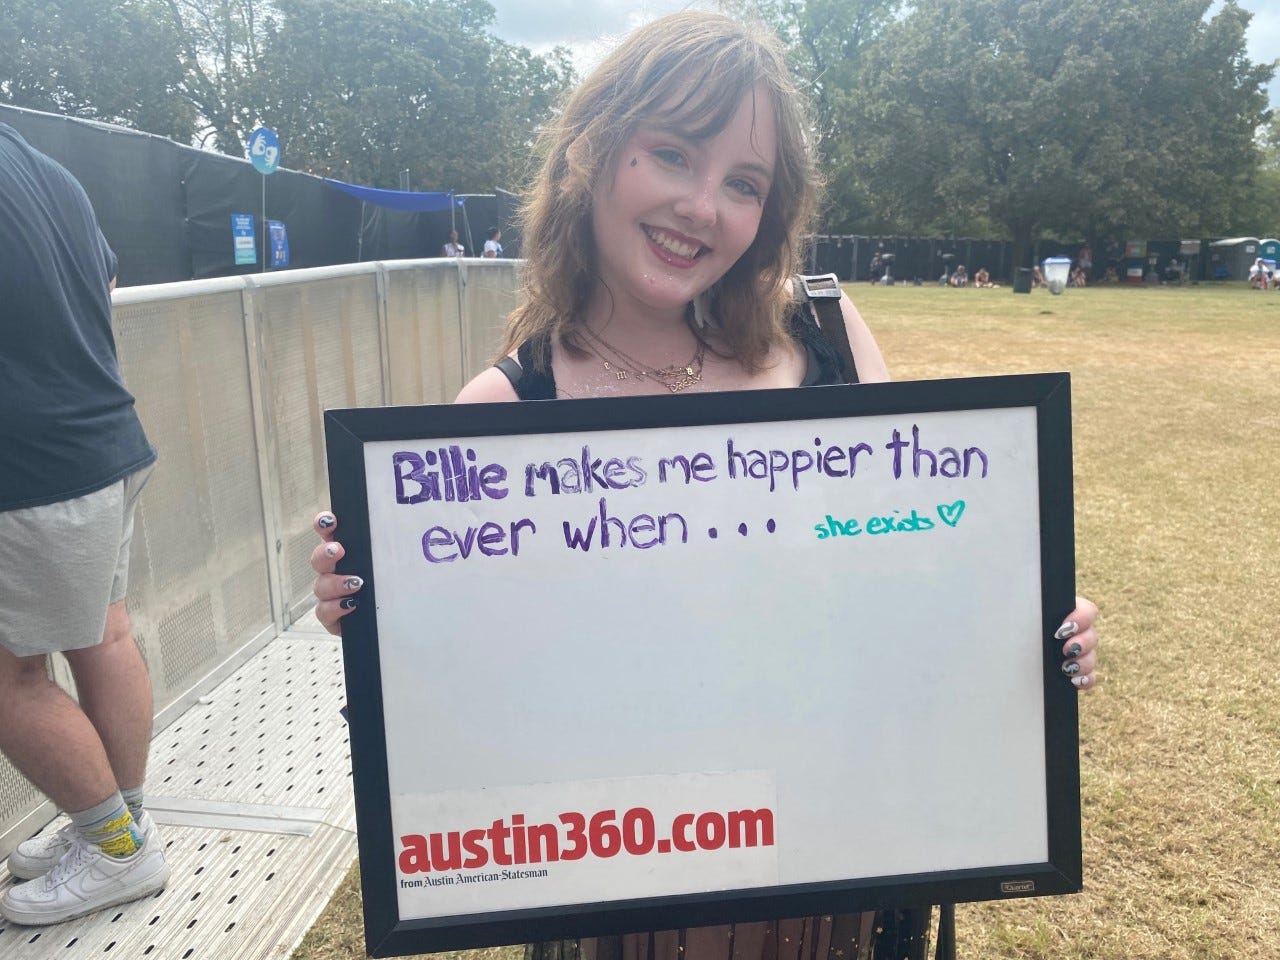 Alexandria Downing, 21, waiting for the Billie Eilish show on Saturday Oct. 2, 2021. She is from Dallas, Texas.